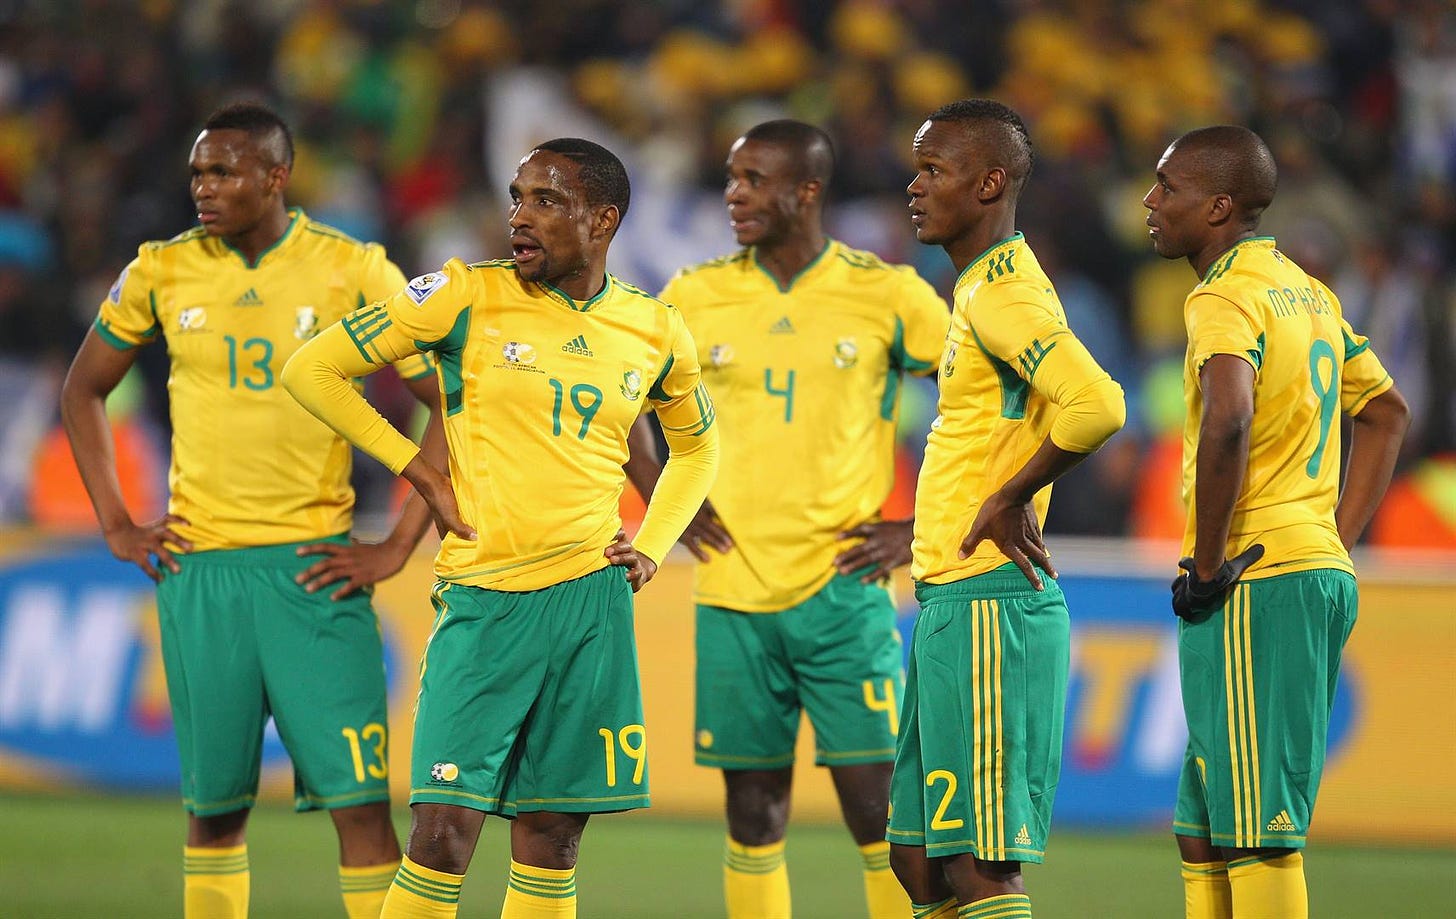 Fifa World Cup: Where are Bafana's 'class of 2010' members? | City Press